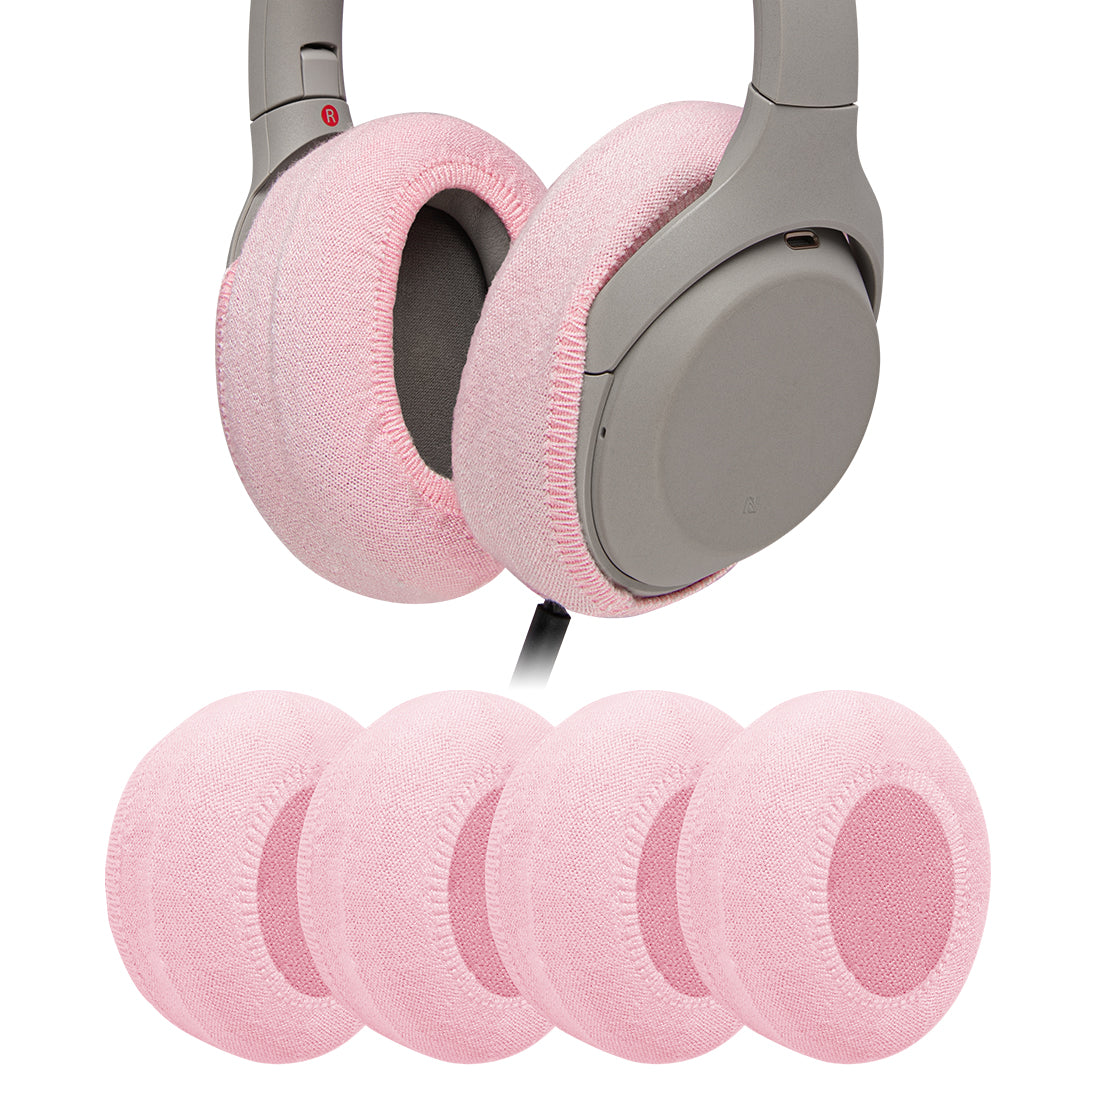 Geekria 2 Pairs Knit Headphones Ear Covers, Washable & Stretchable San